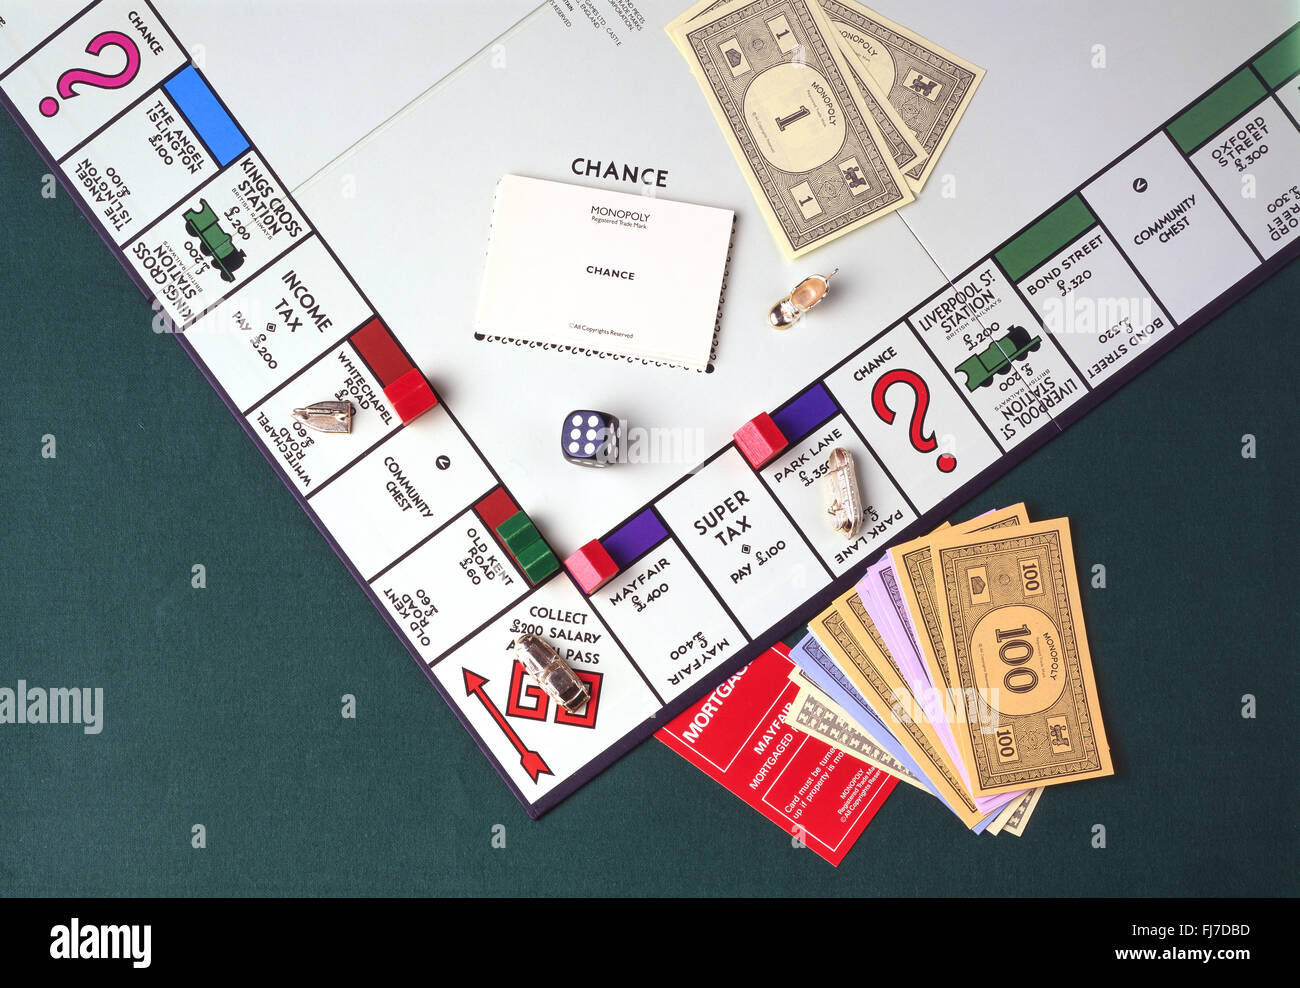 Monopoly board game with money, notes, counters and dice in studio setting, Greayer London, England, United Kingdom Stock Photo